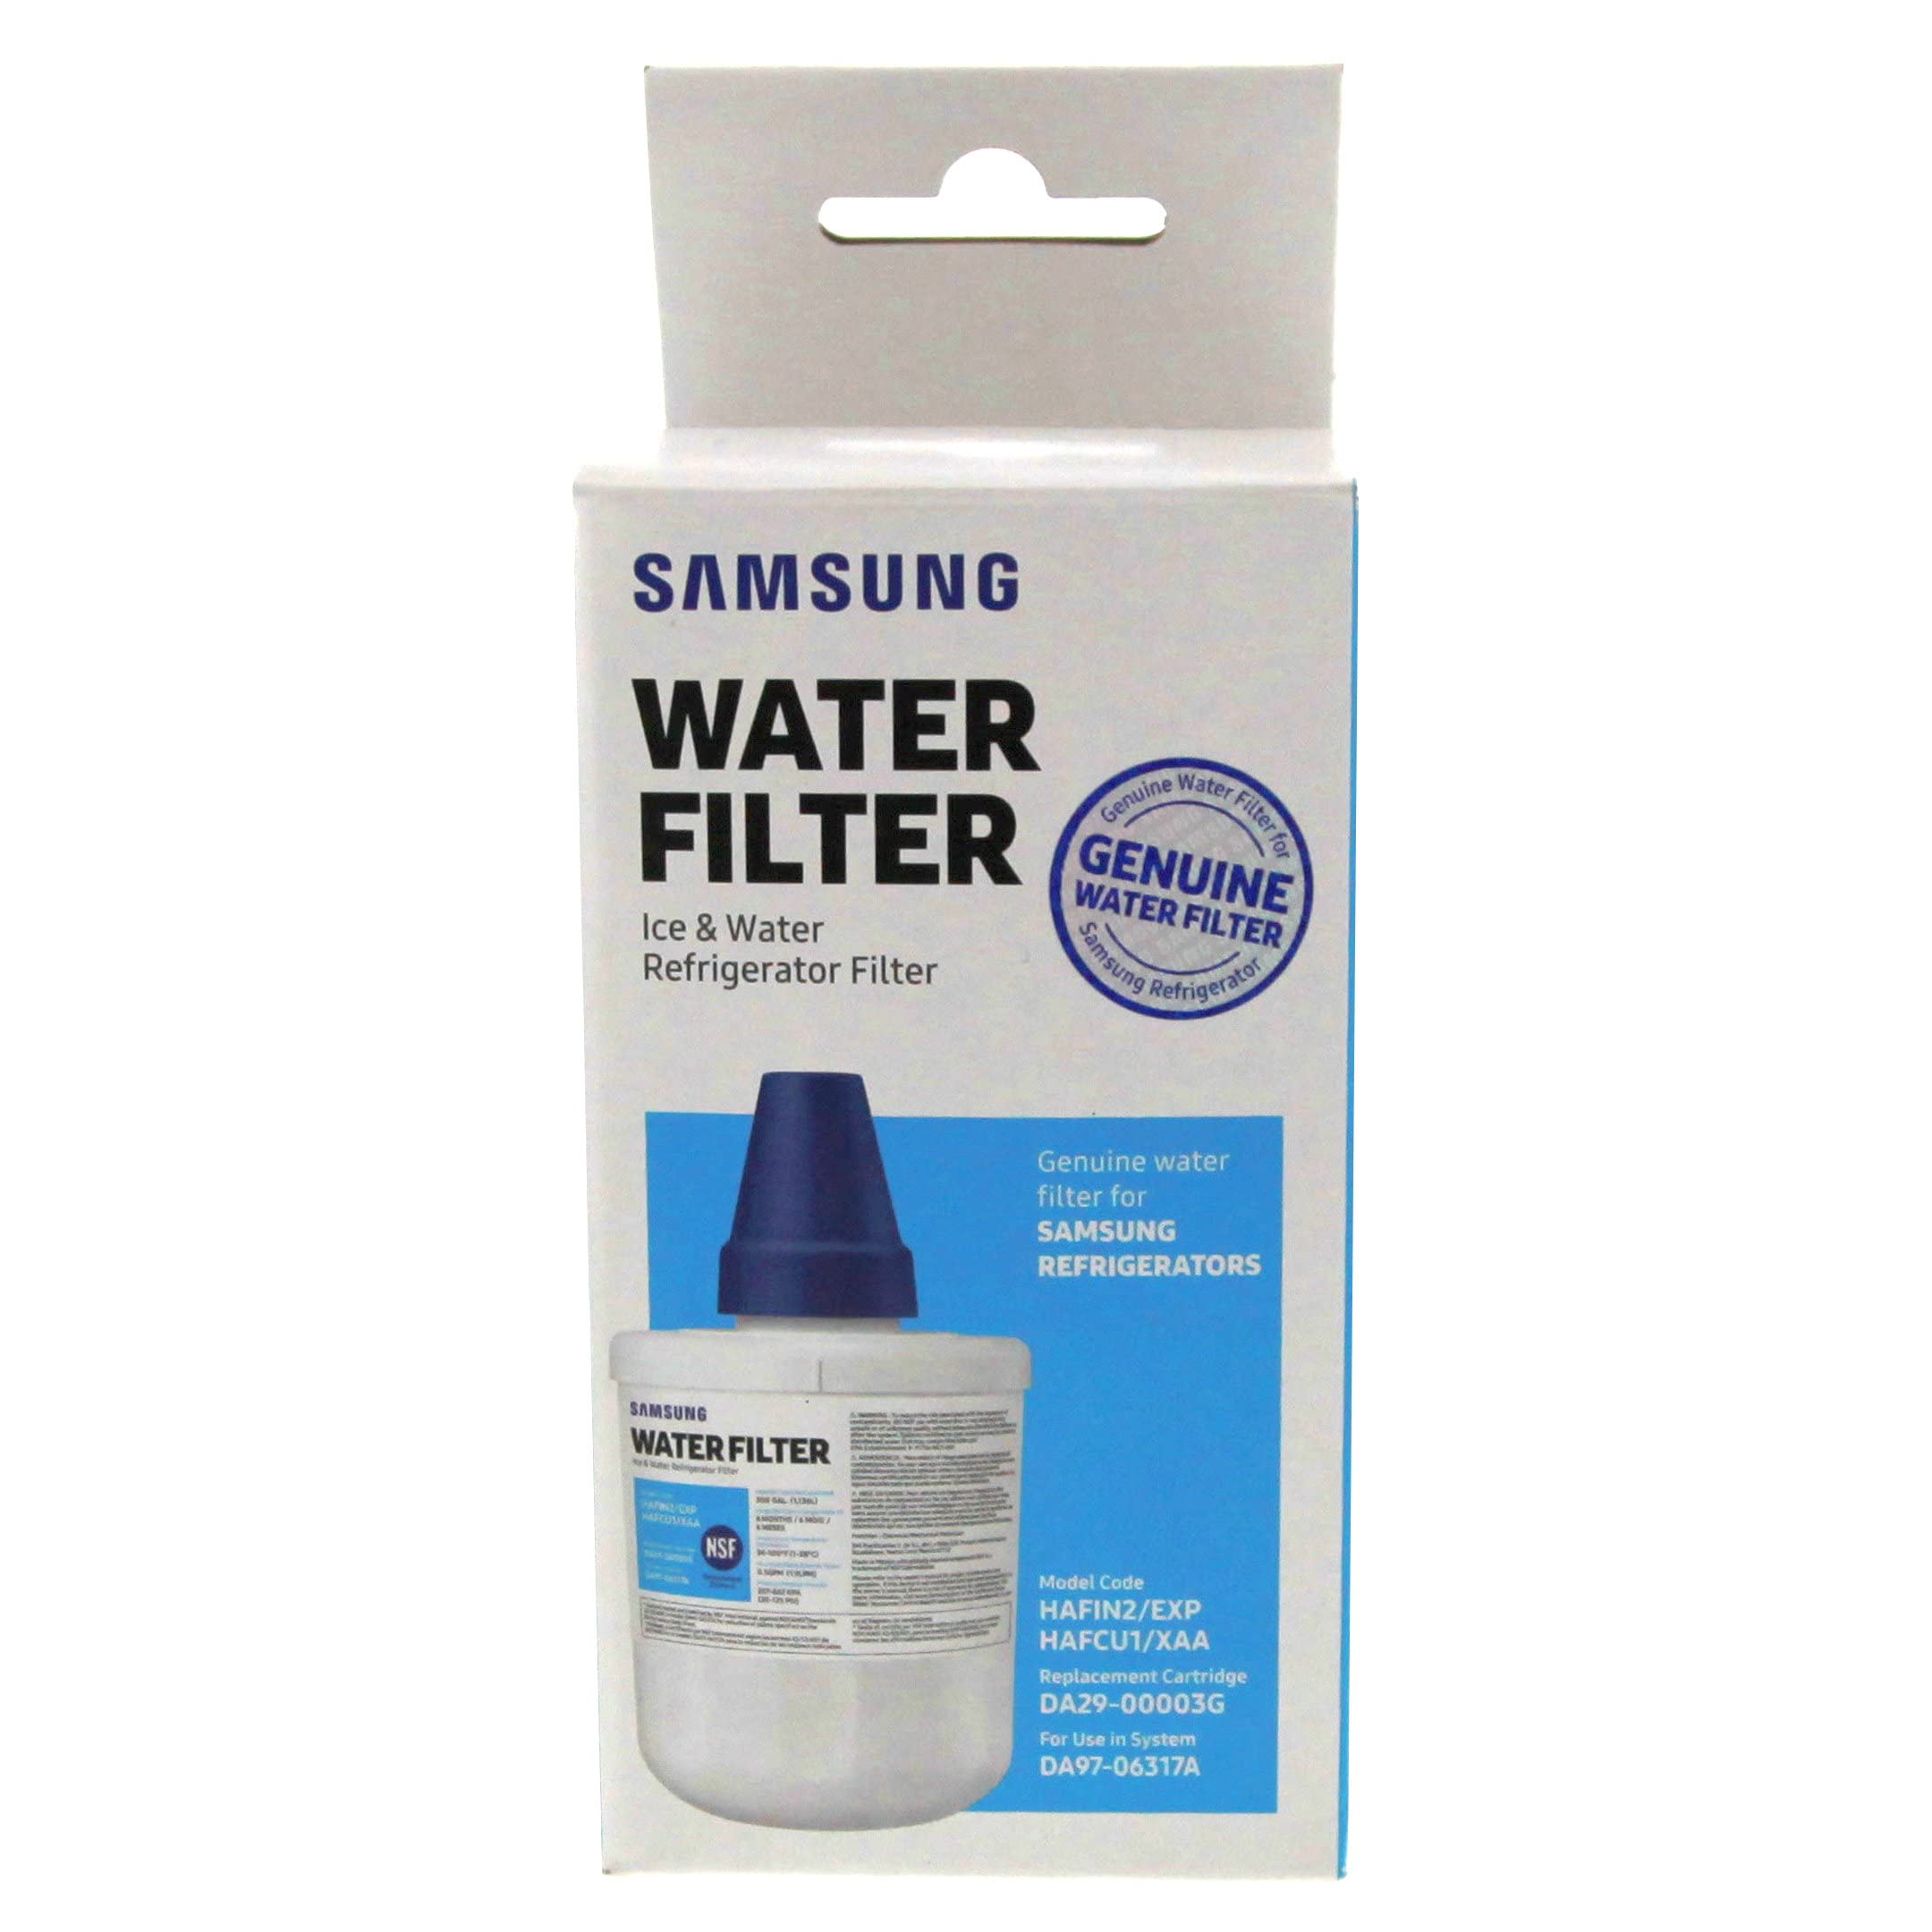 SAMSUNG Genuine Filter for Refrigerator Water and Ice, Carbon Block Filtration for Clean, Clear Drinking Water, 6-Month Life, DA29-00003G, 1 Pack